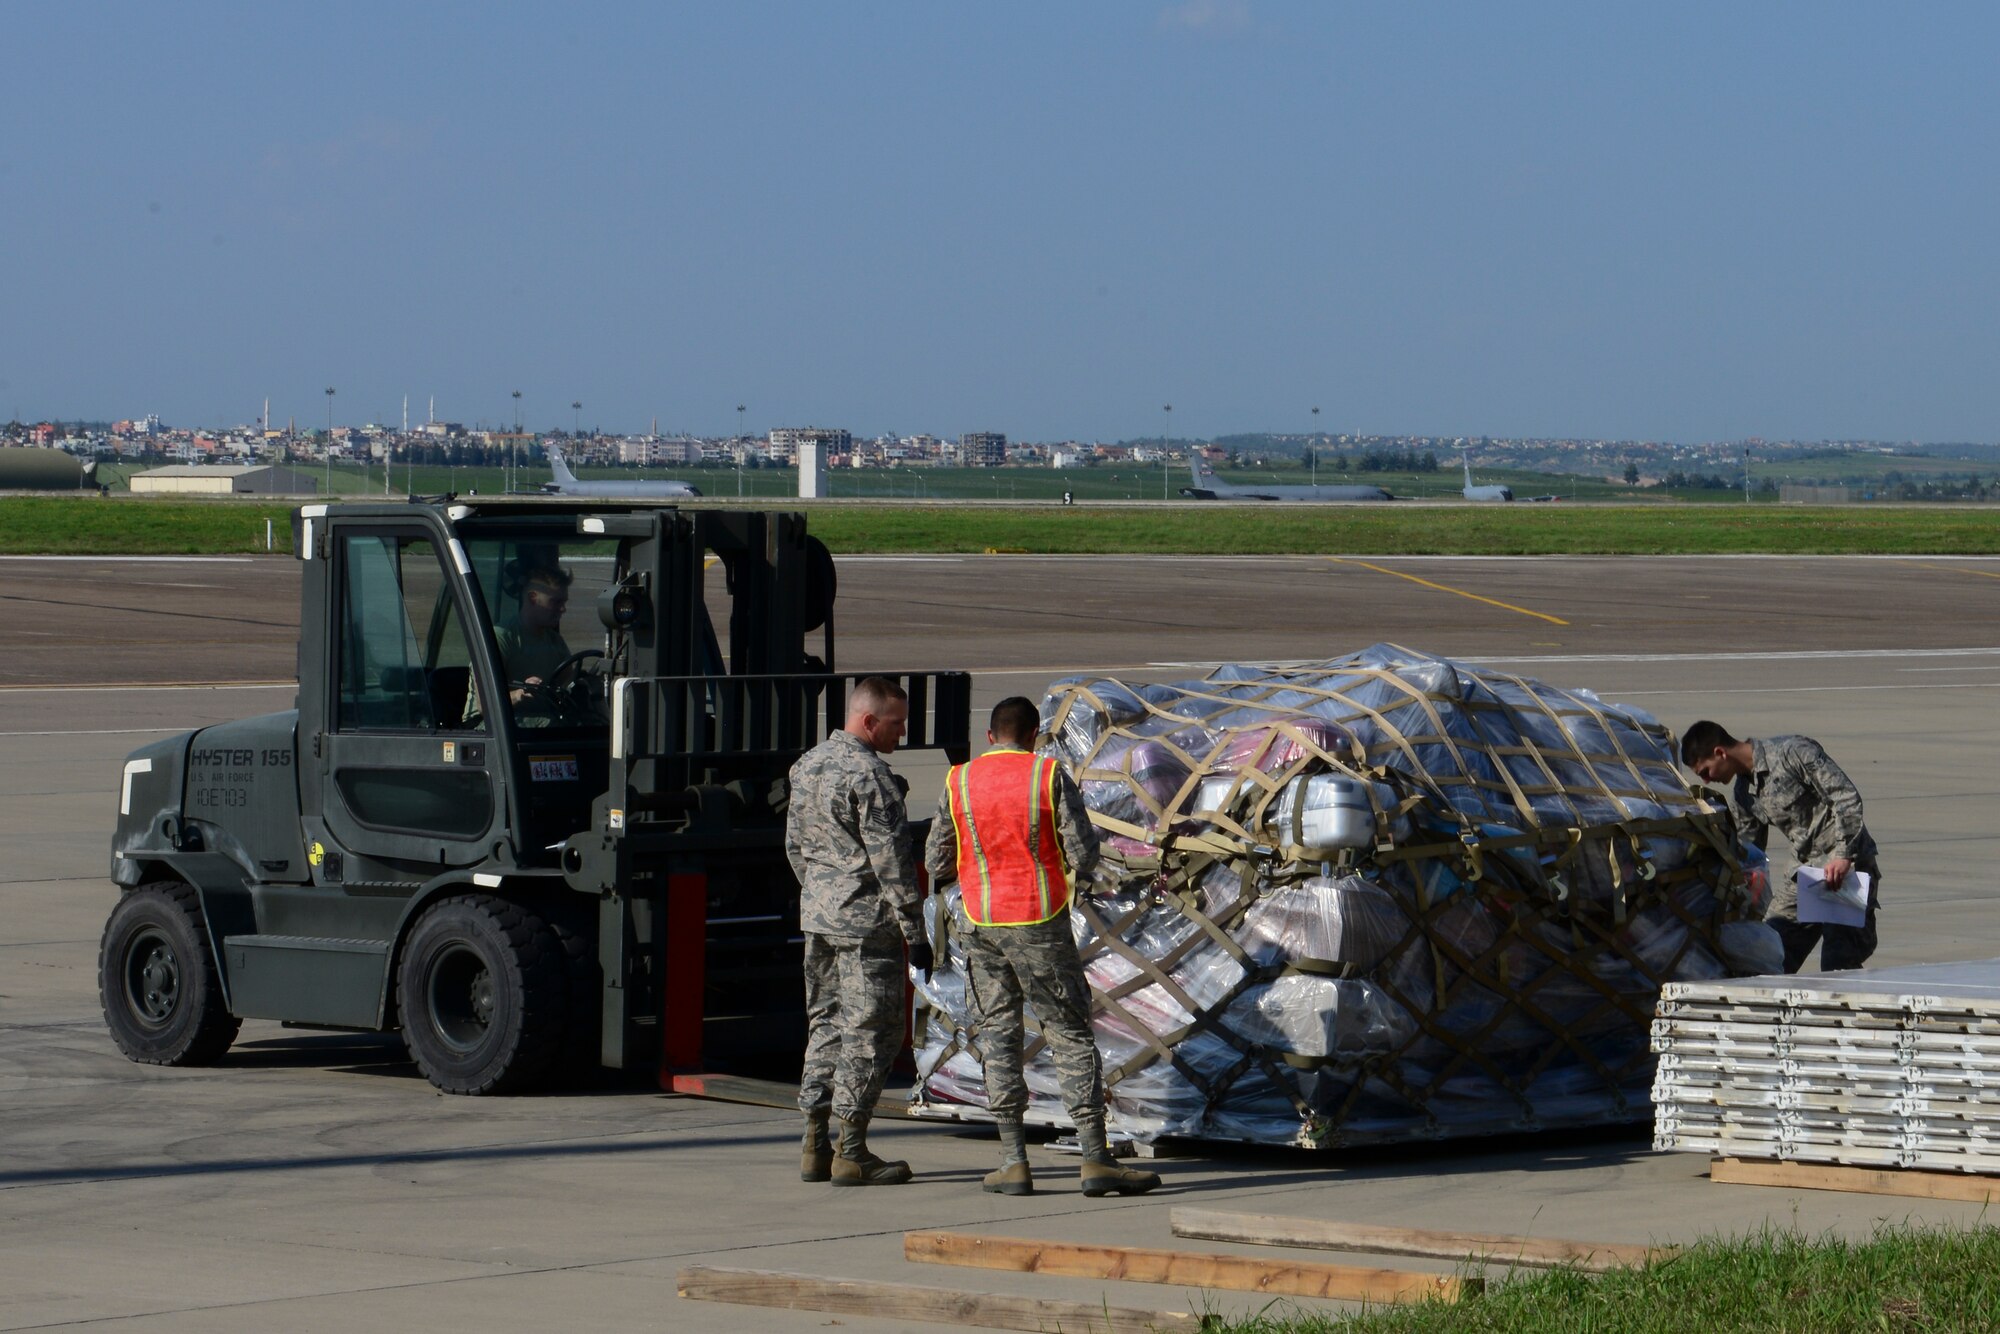 Members of the 728th Air Mobility Squadron along with volunteers, stage a pallet of luggage during an ordered departure for dependents, March 31, 2016, at Incirlik Air Base, Turkey. The Secretary of Defense, in coordination with the Secretary of State, ordered the departure of all Department of Defense dependents assigned to Incirlik Air Base. (U.S. Air Force photo by Staff Sgt. Caleb Pierce/Released)